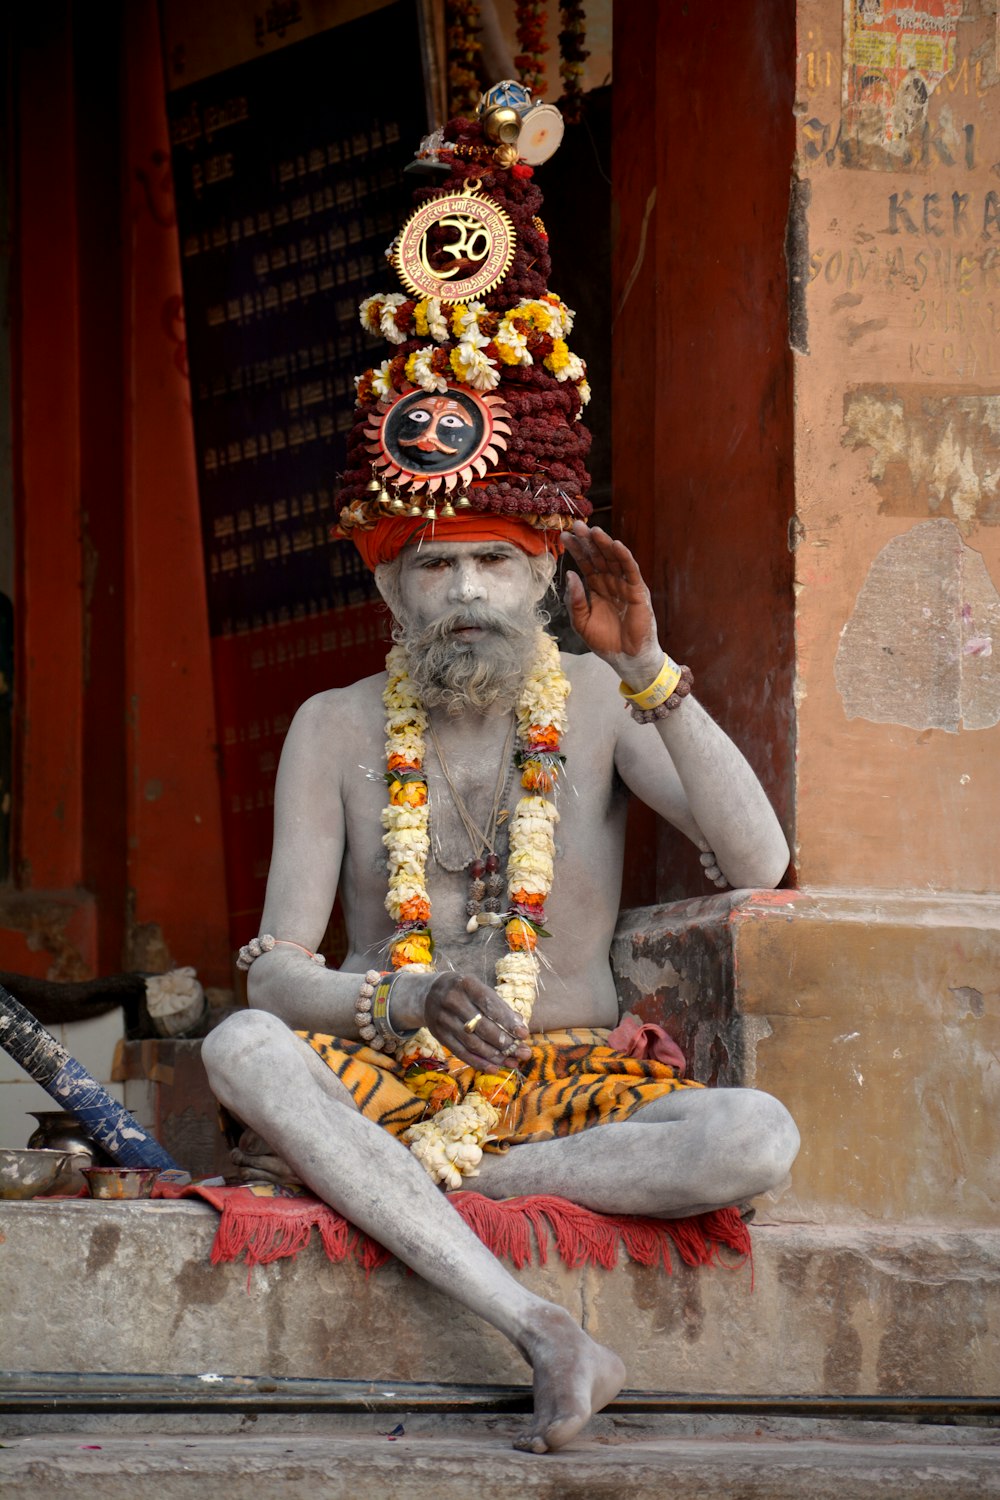 a man sitting on the ground wearing a headdress